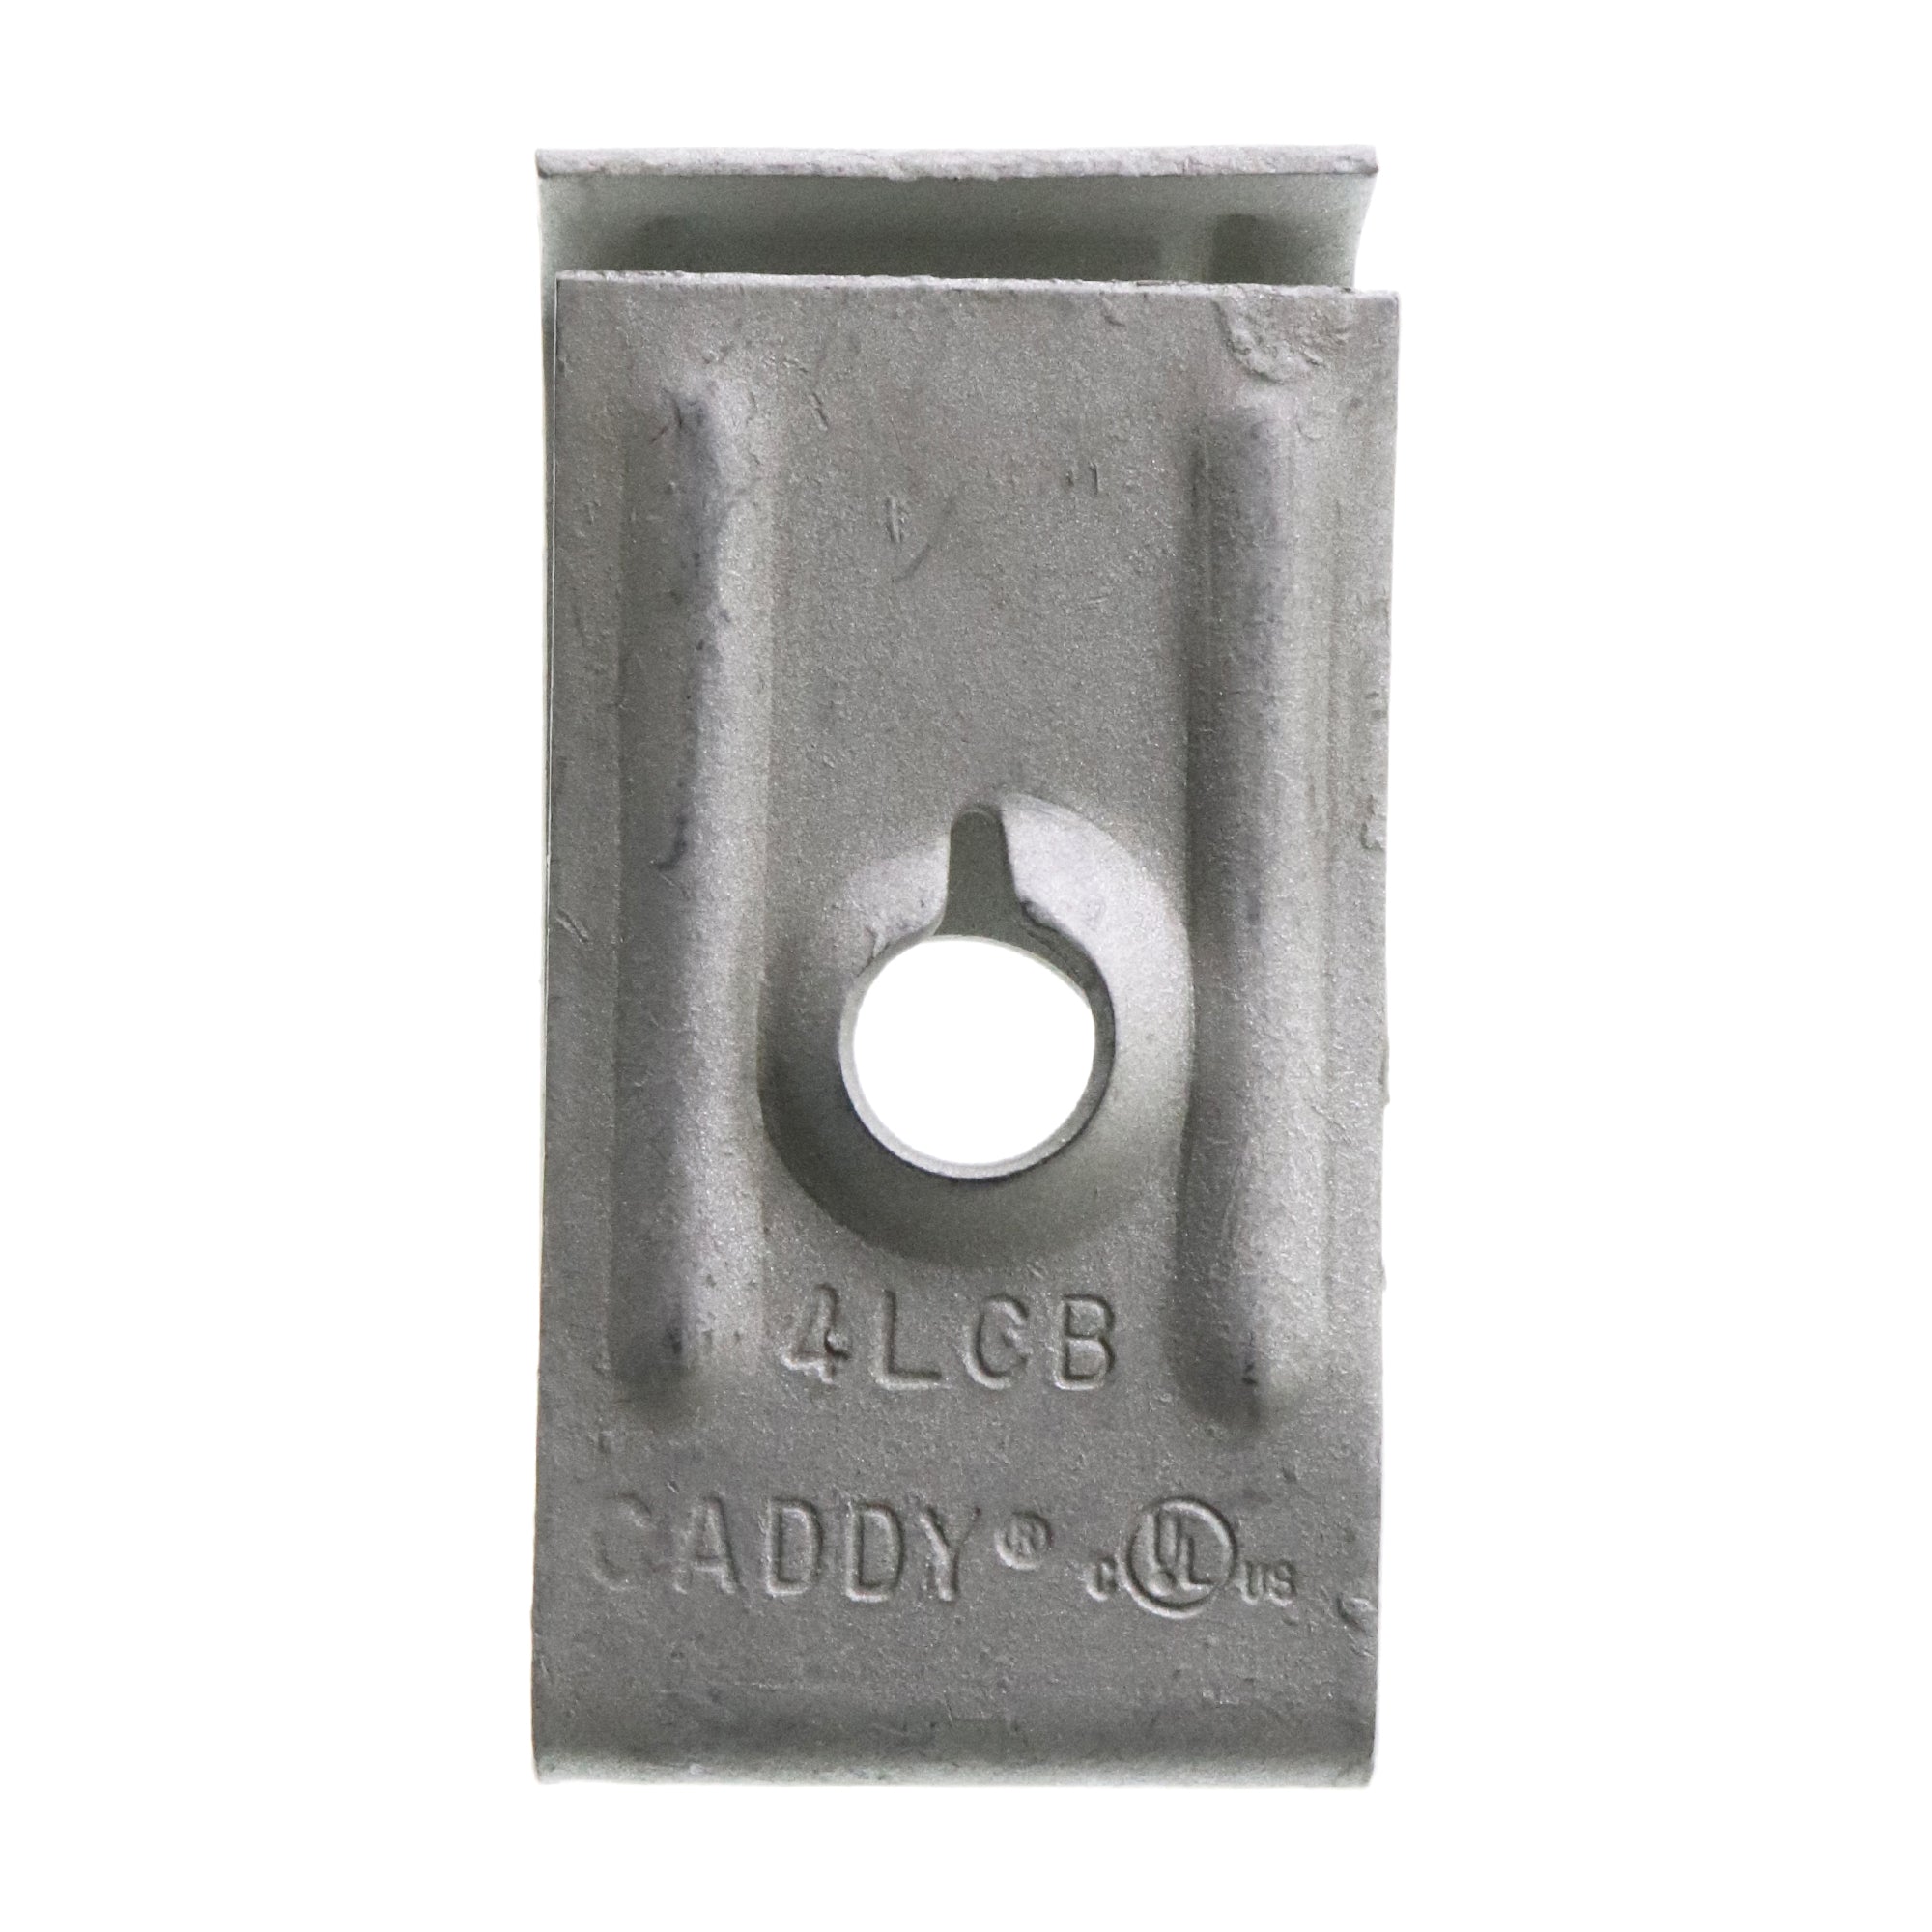 Erico Caddy Cadwal, CADDY ERICO 4LCB LATHERS CHANNEL CLIP BOX MOUNT BRACKET, 1/4-INCH, (100-PACK)